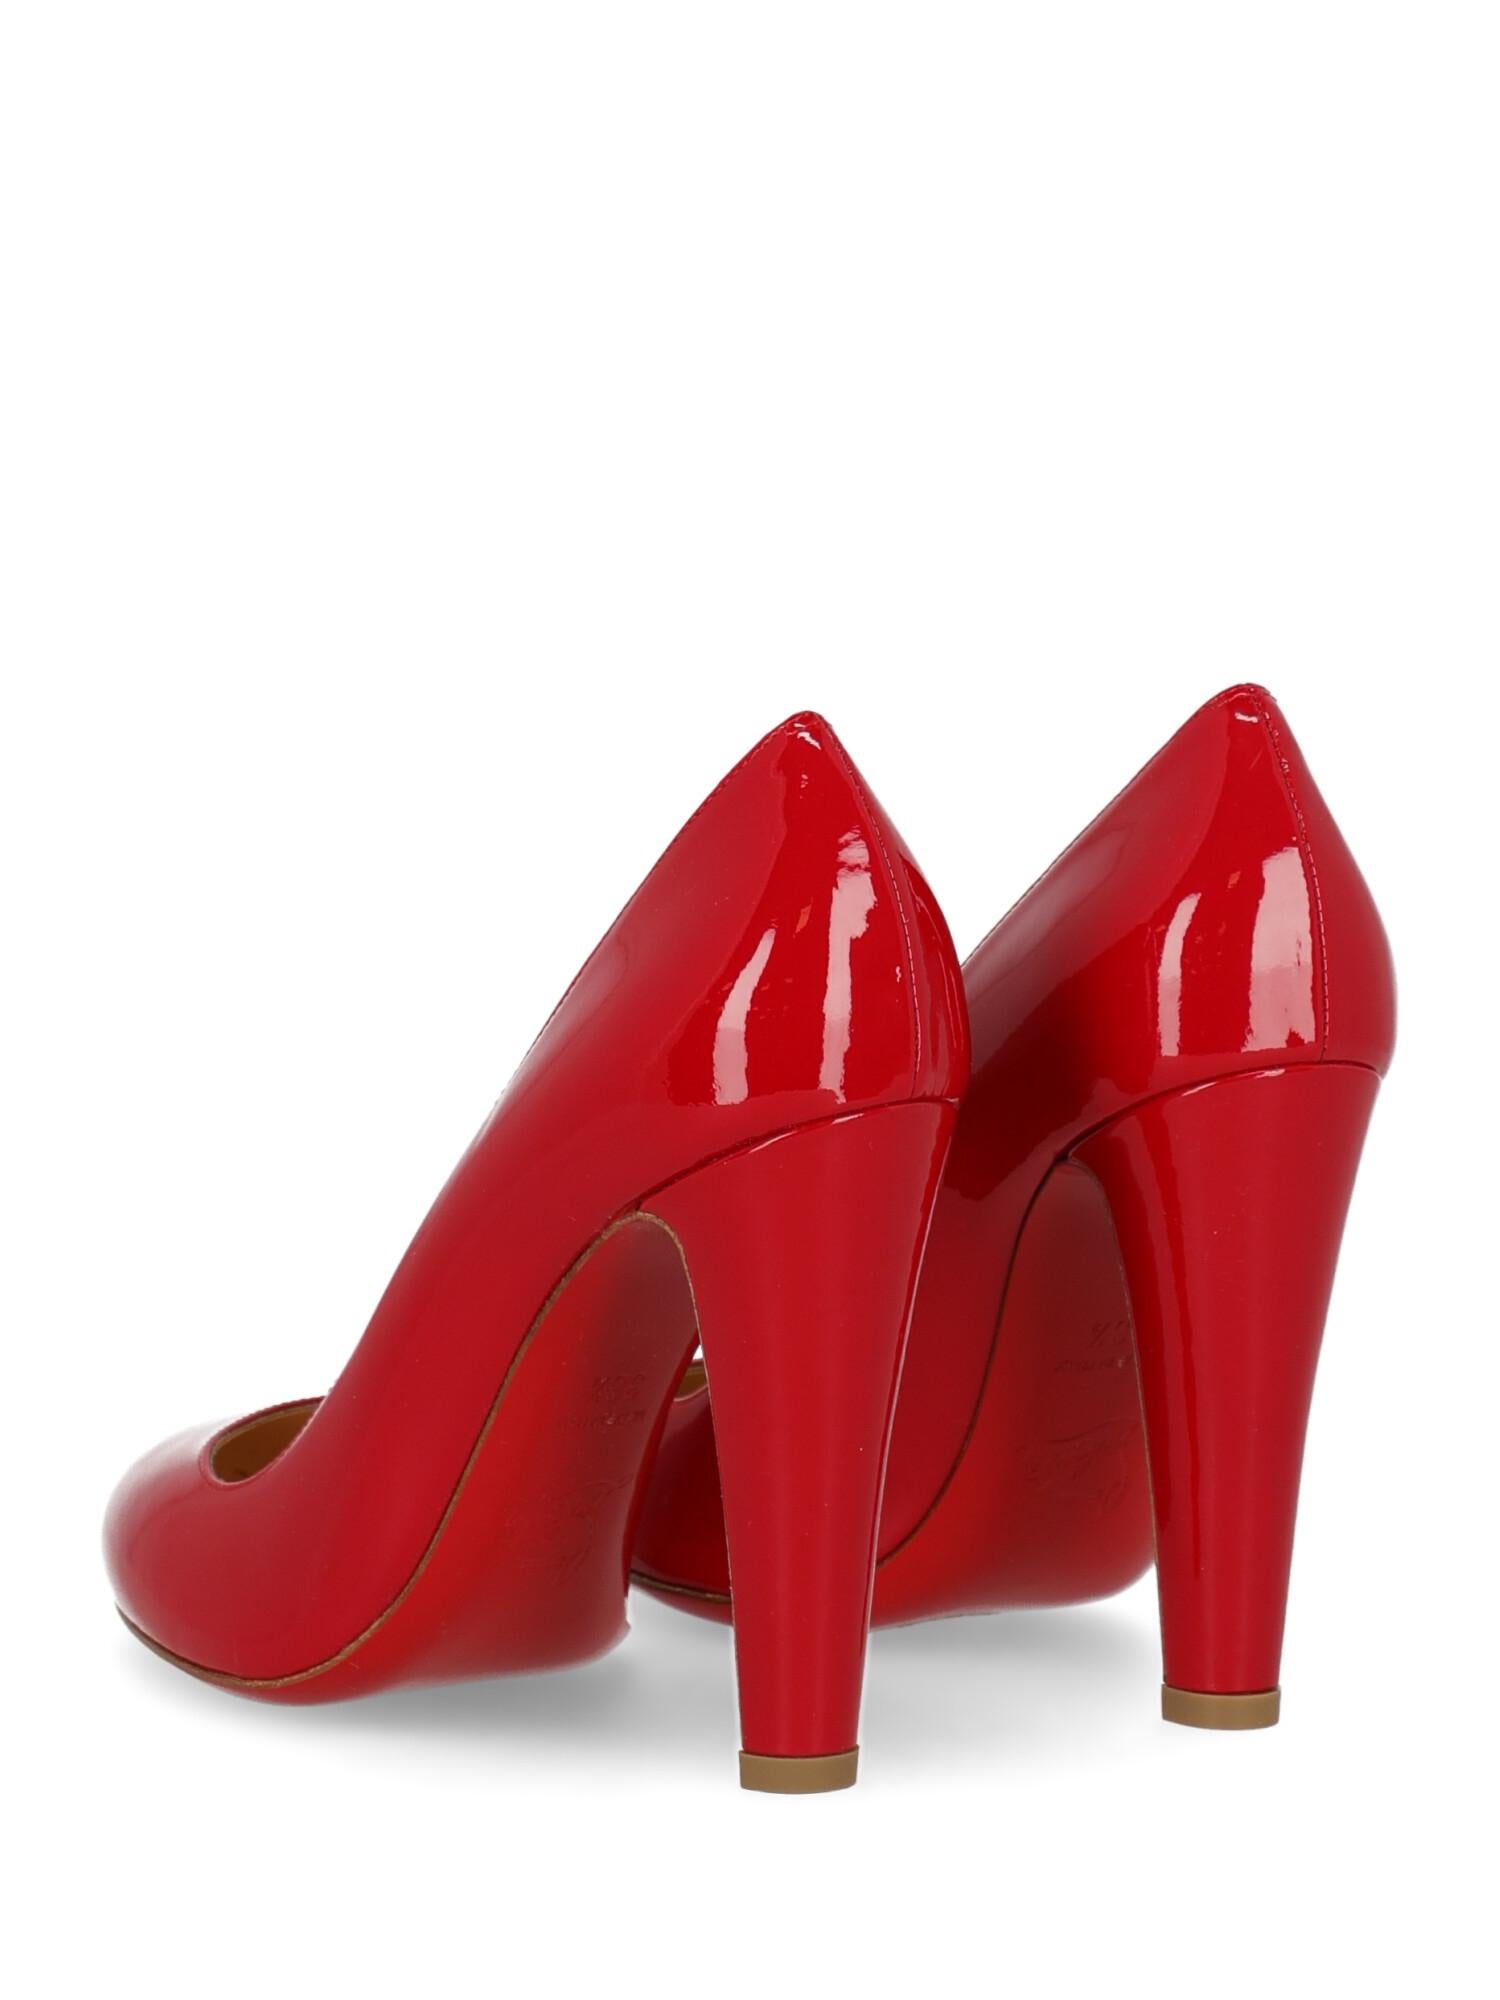 Women's Christian Louboutin Woman Pumps Red Leather IT 36.5 For Sale